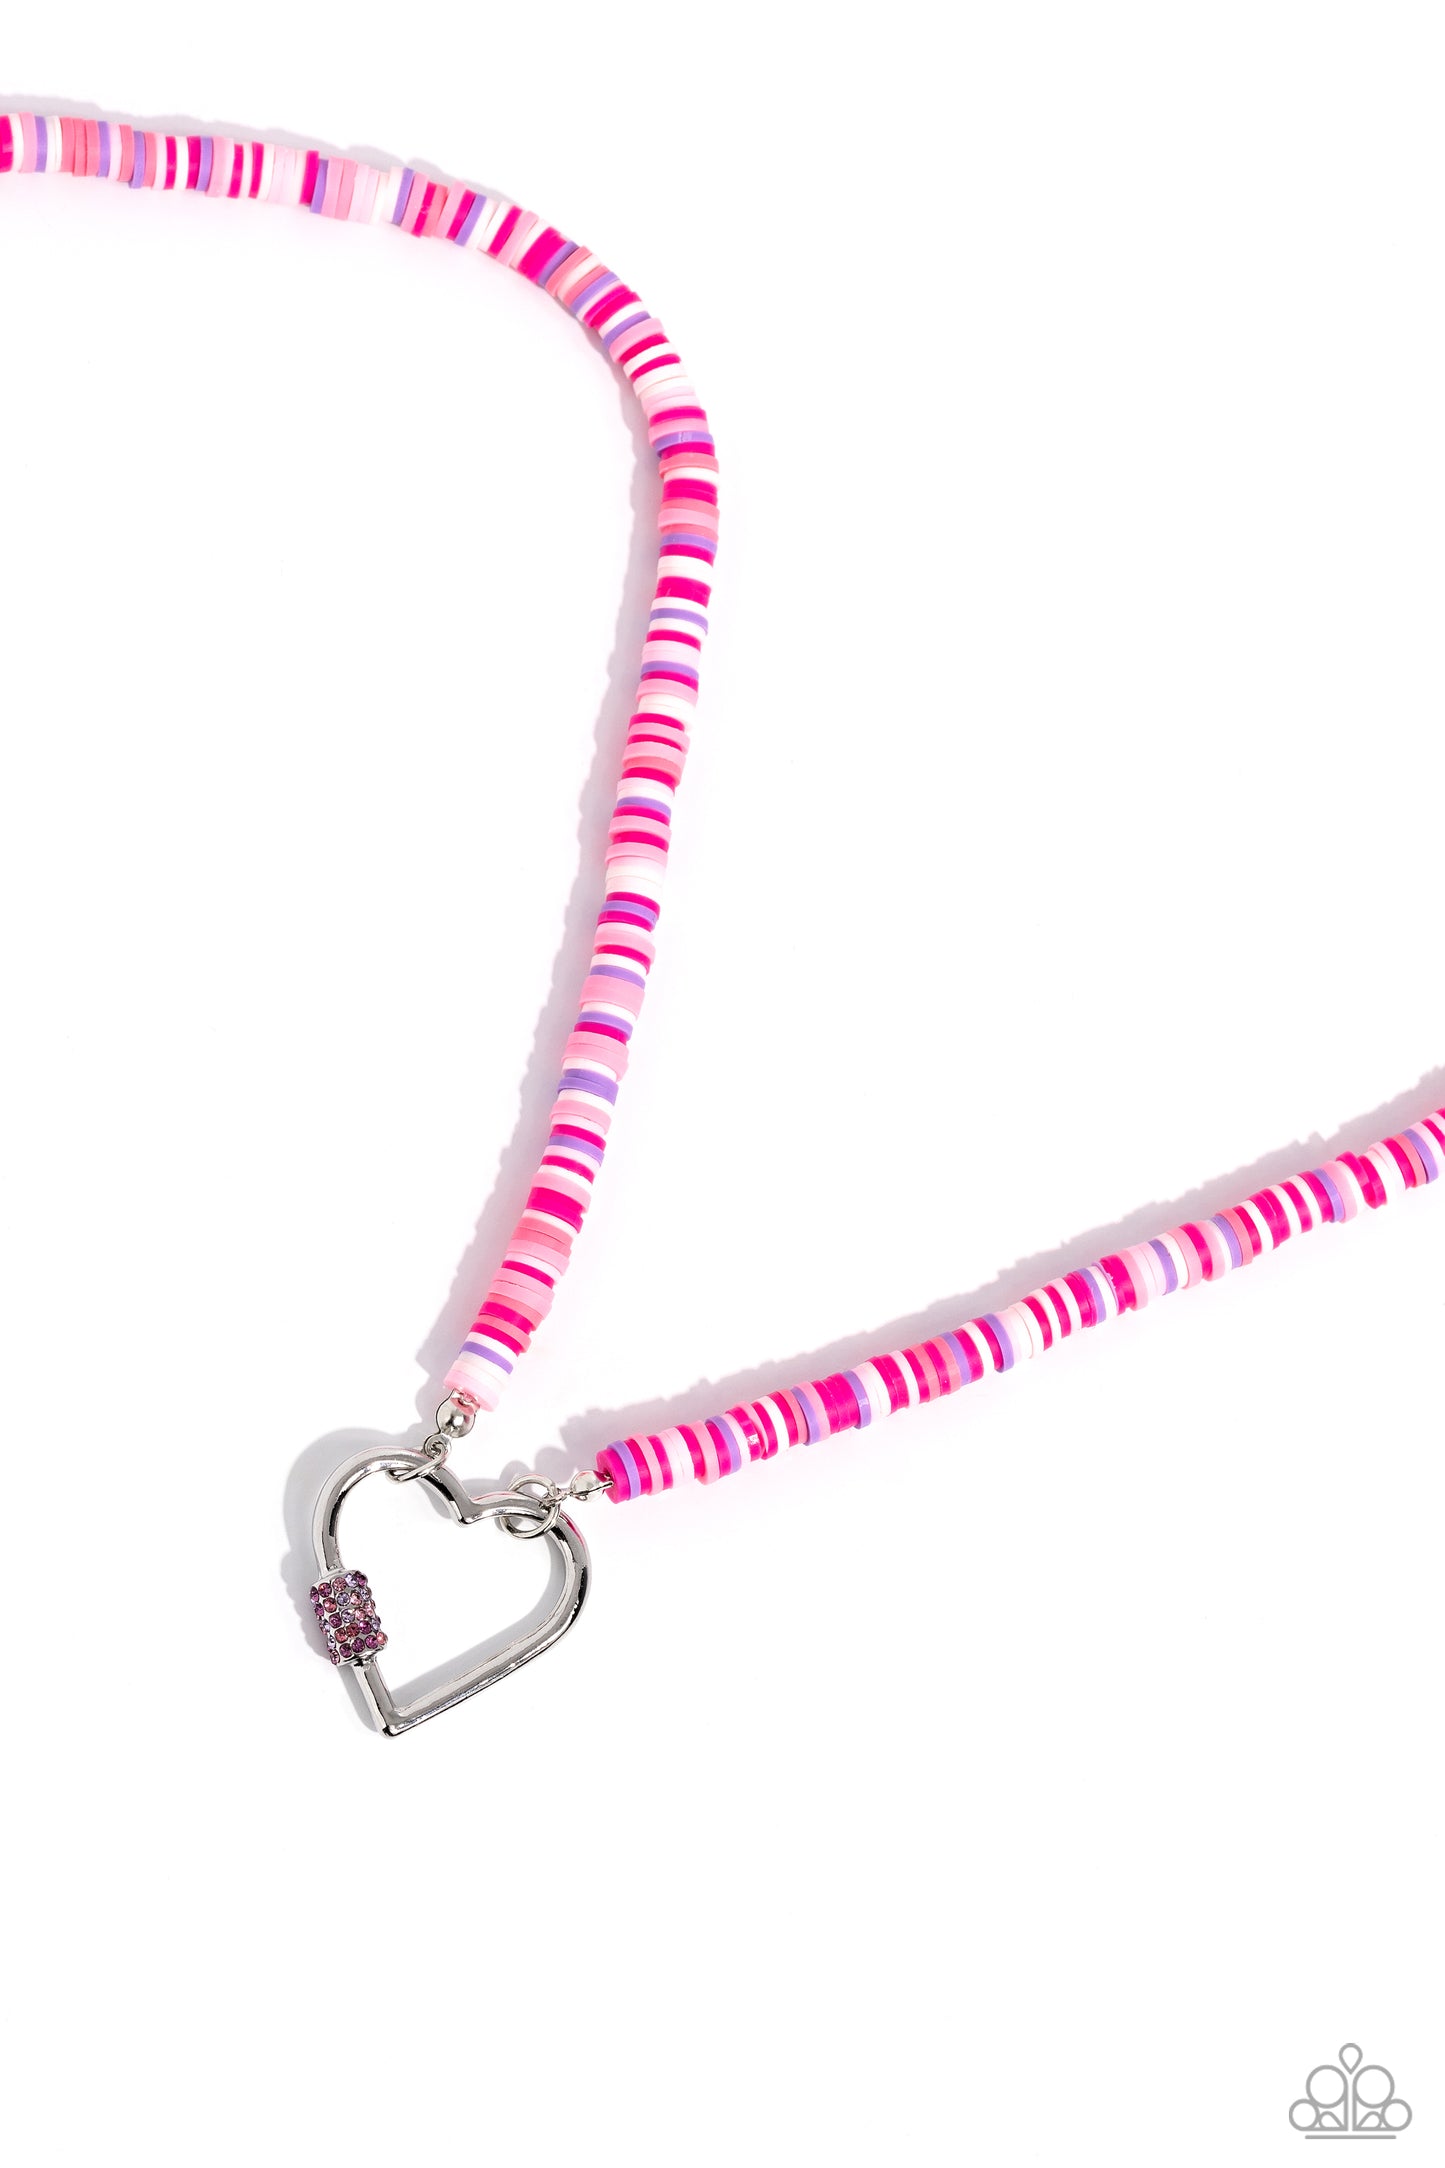 Clearly Carabiner - Pink Necklace